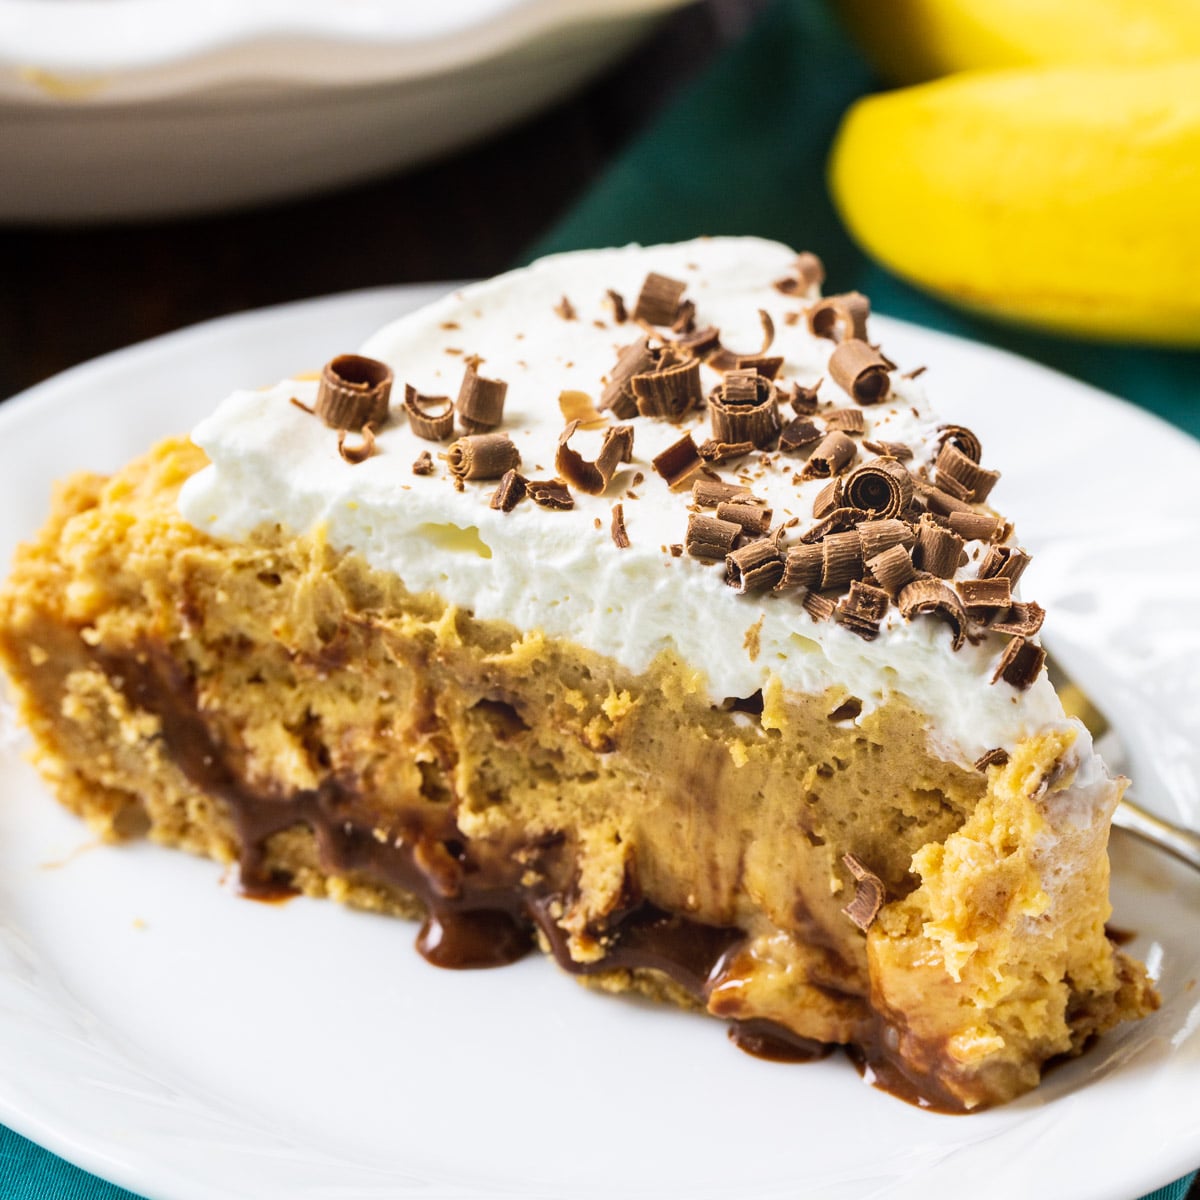 Slice of Creamy Peanut Butter Banana Pie on a plate.